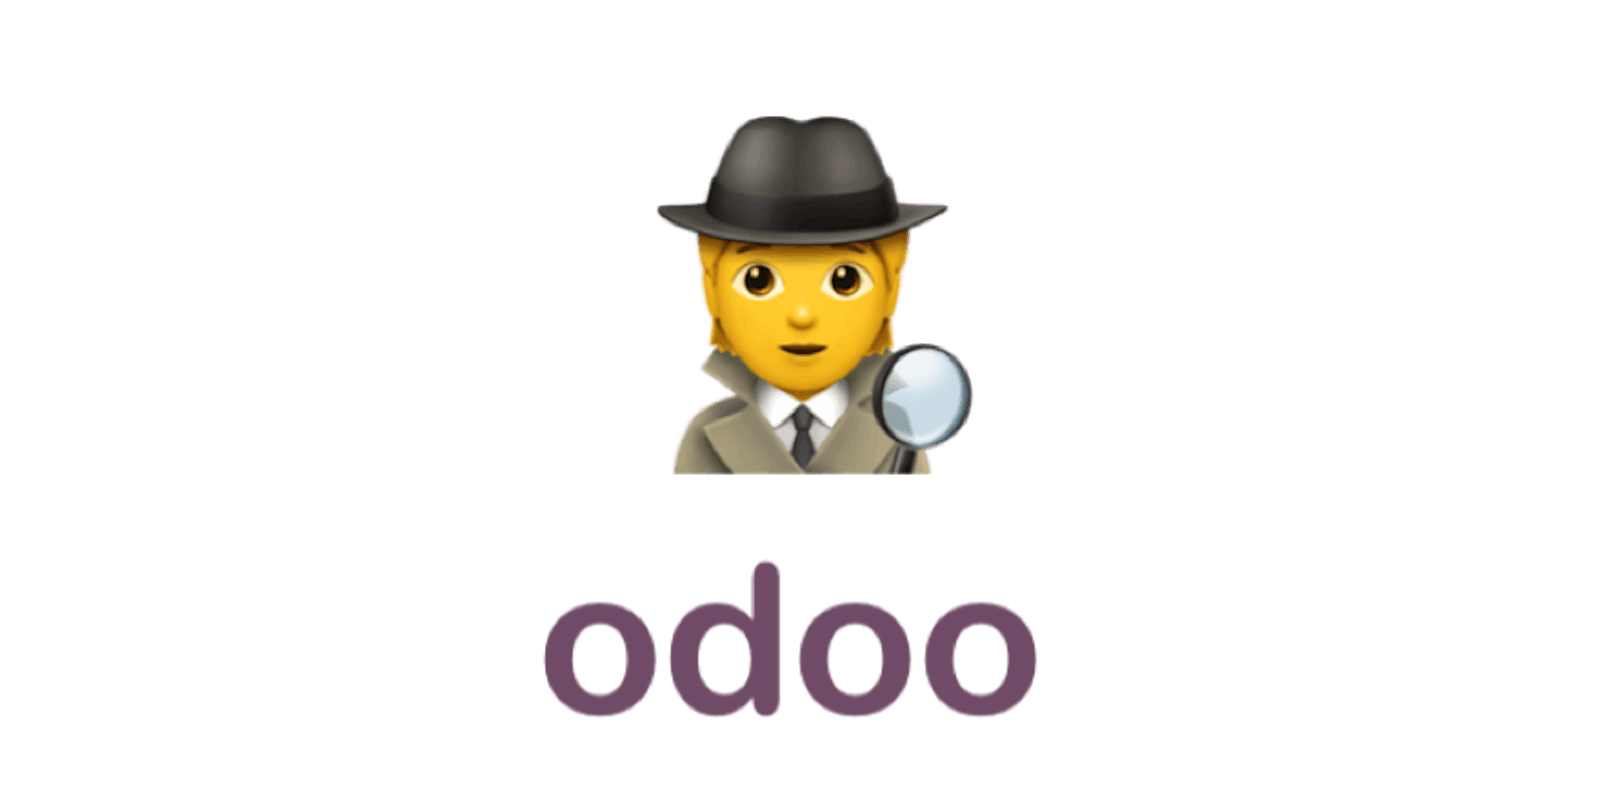 A hook solution to spy the Odoo web page 🕵️